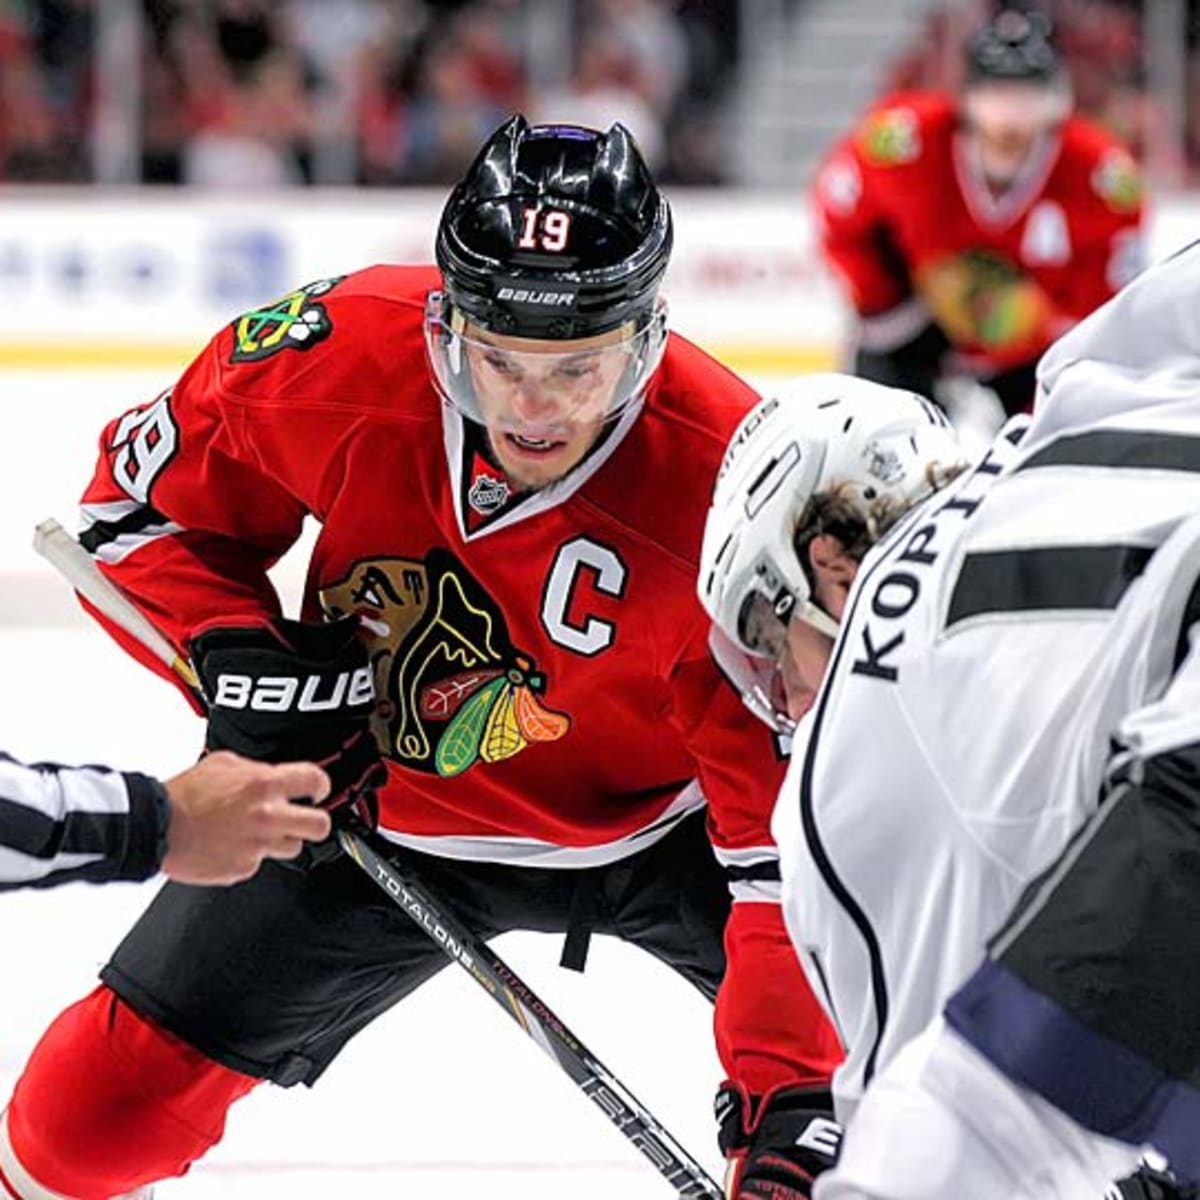 Toews was 'secretly' rooting for Jets to win Cup